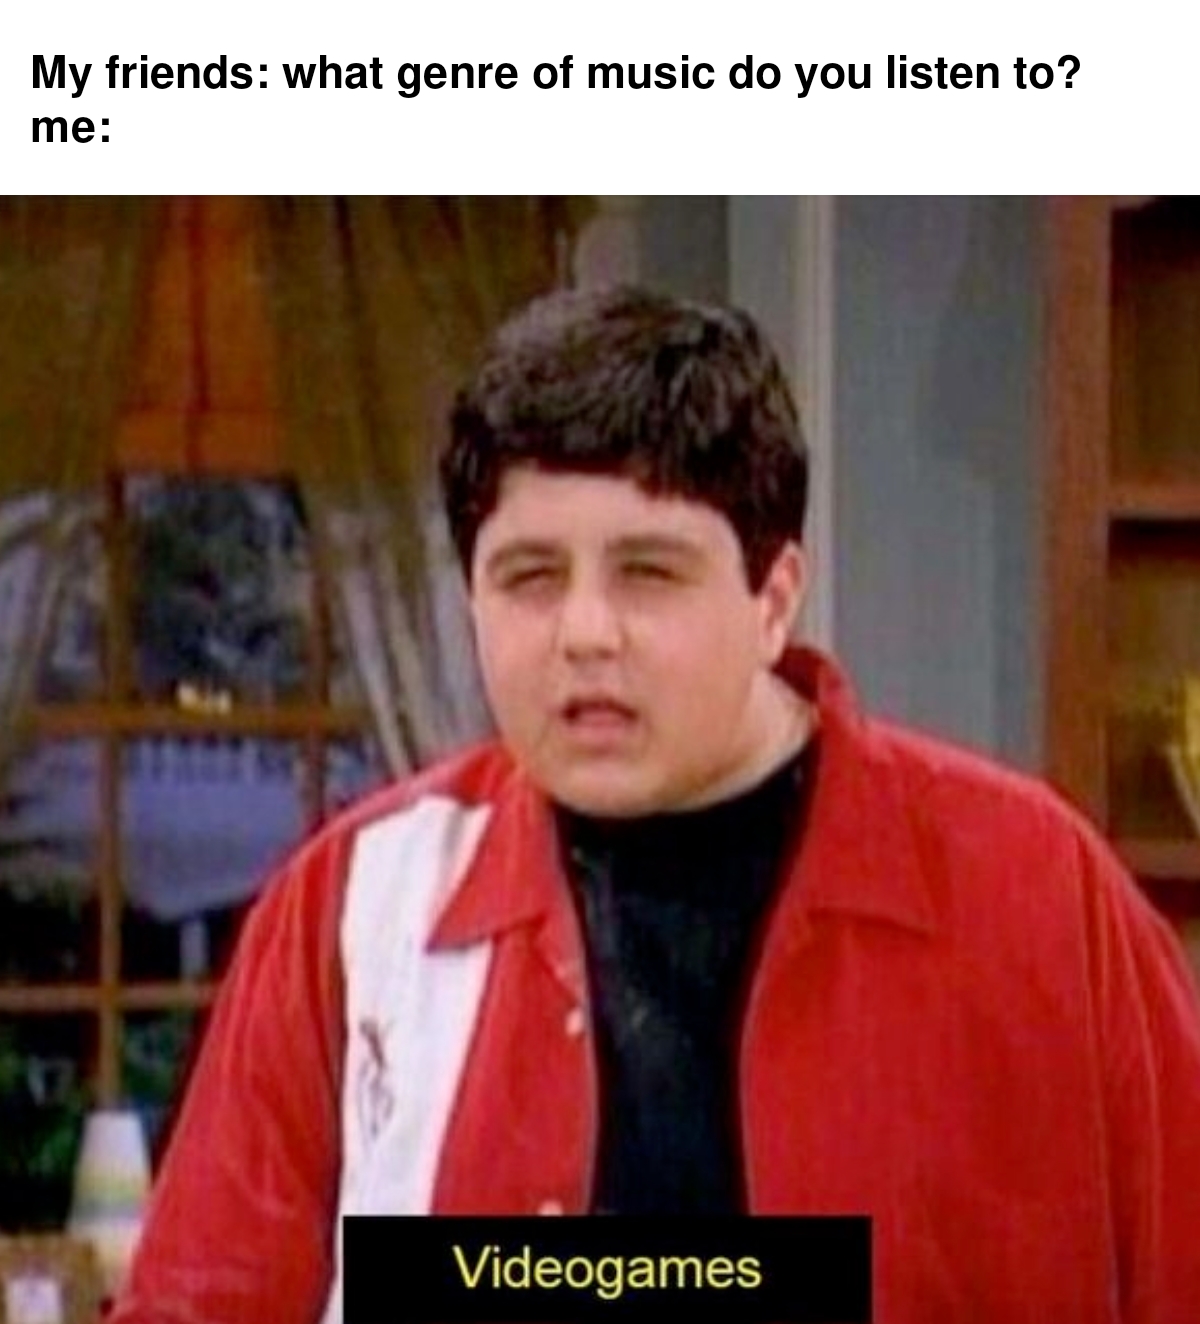 funny memes - video games drake and josh - My friends what genre of music do you listen to? me Videogames